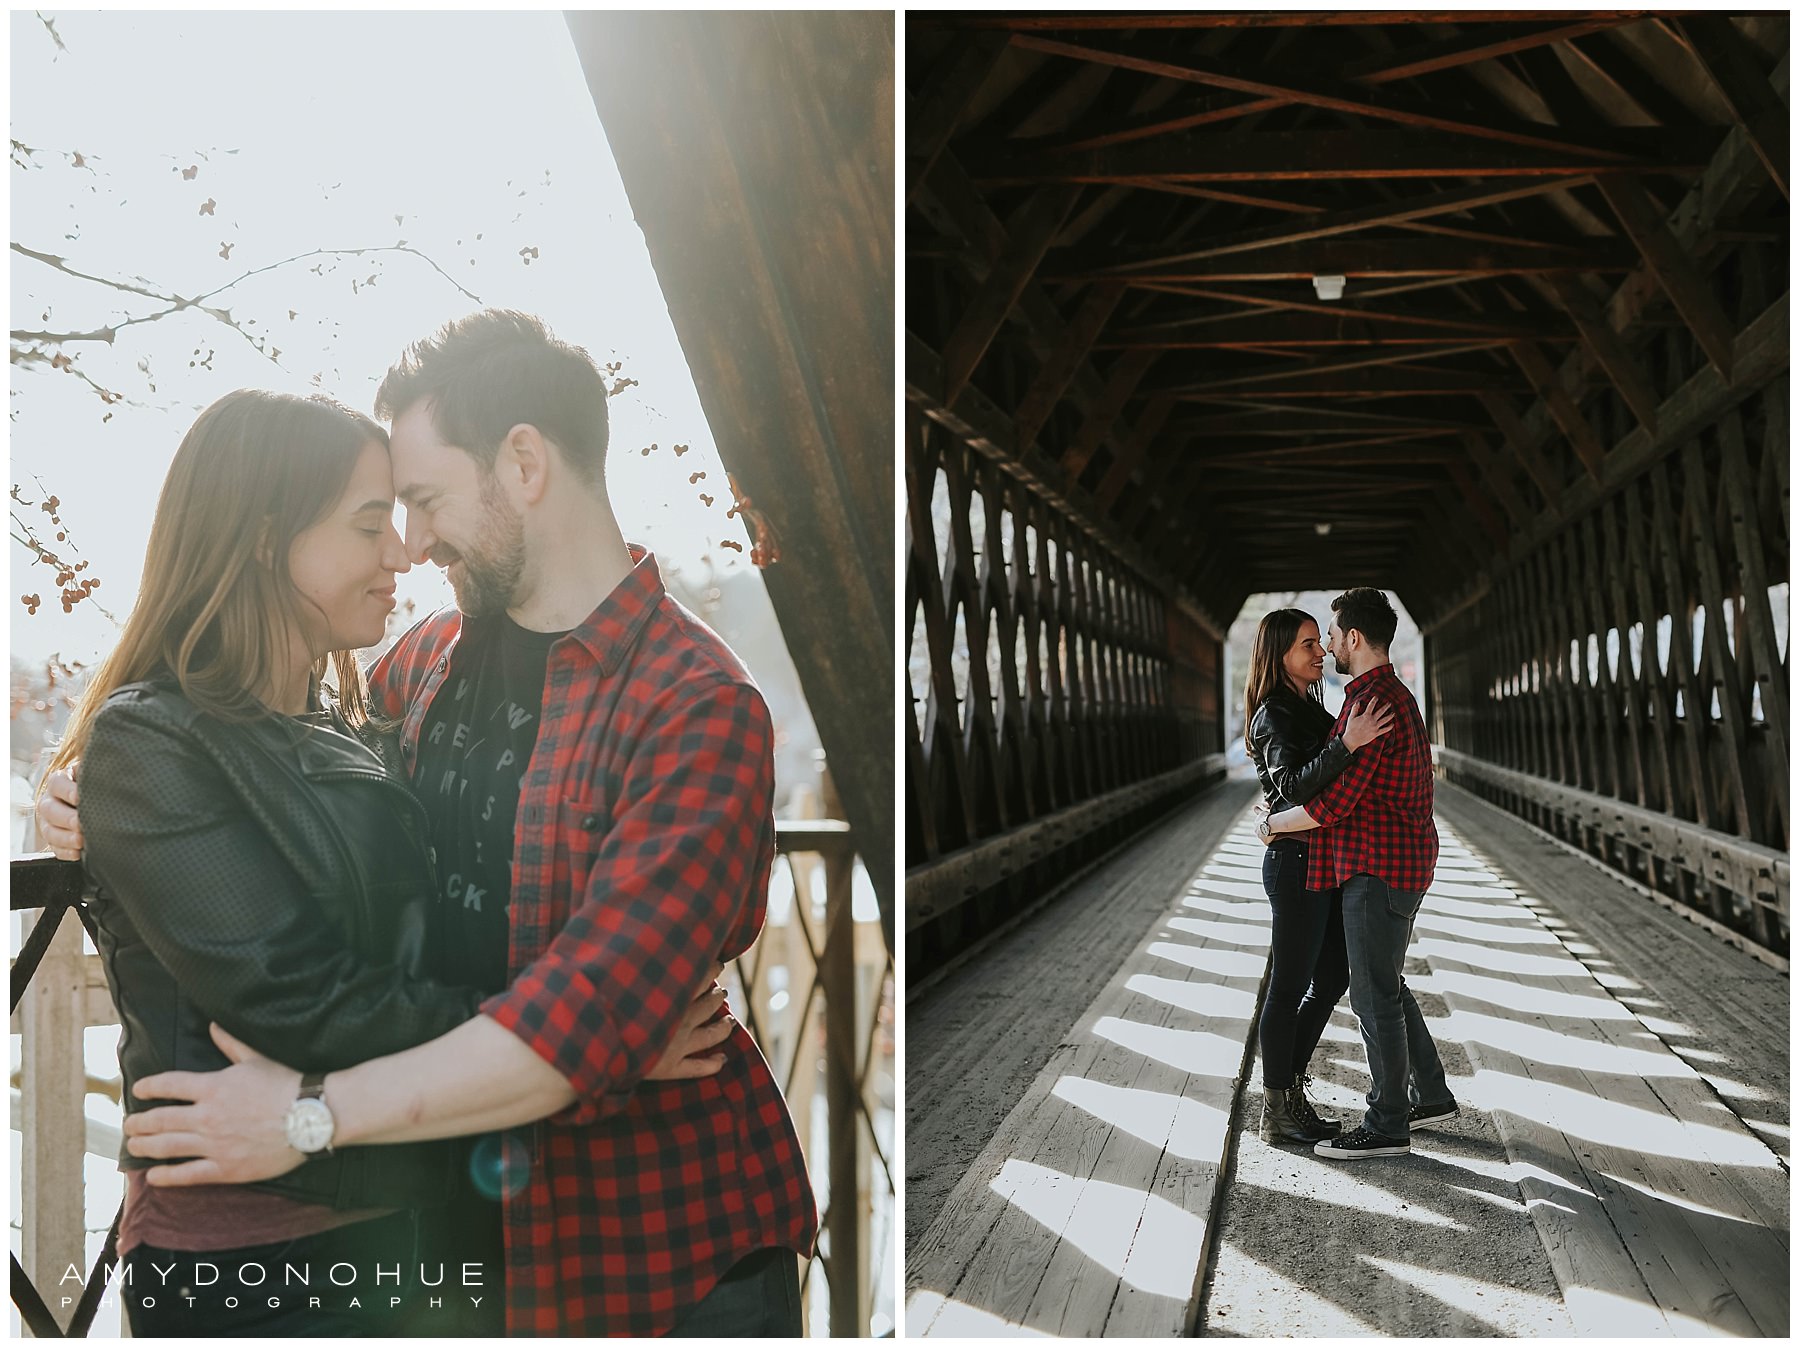 Light-Filled Engagement Photos in Woodstock, Vermont | © Amy Donohue Photography